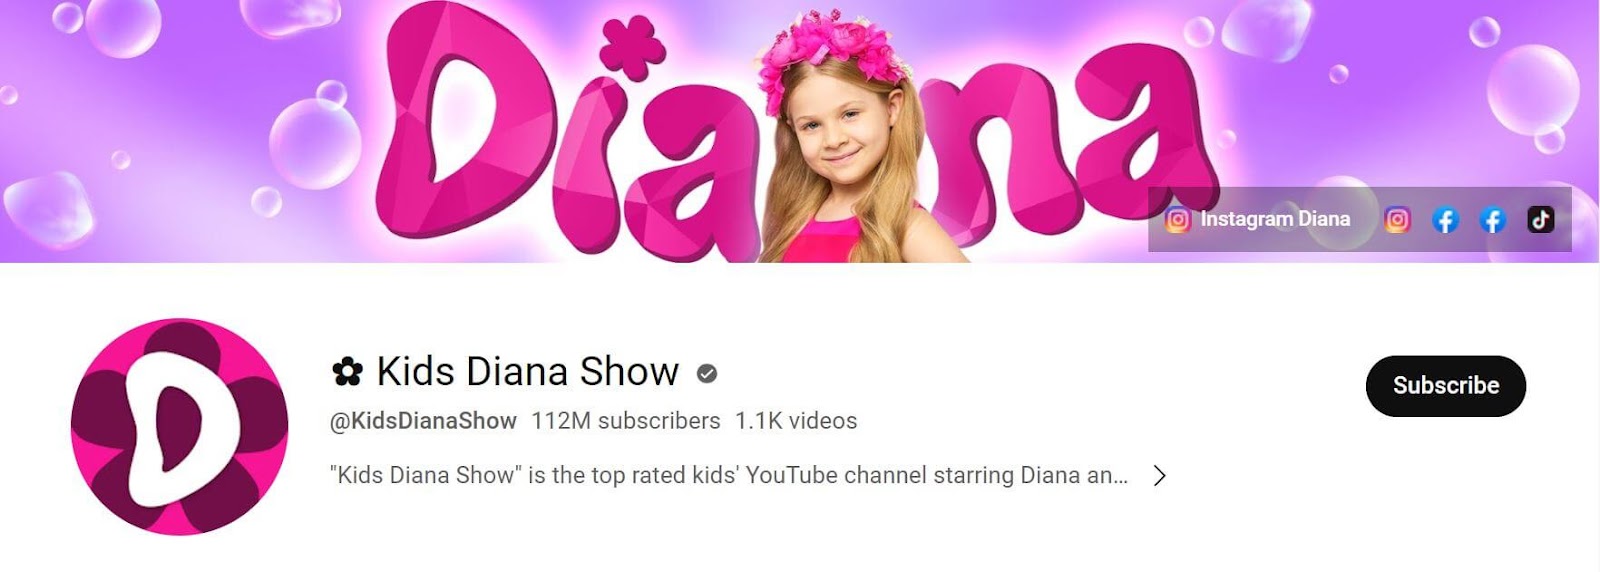 Kids Diana Show: Well-known YouTube Influencer
